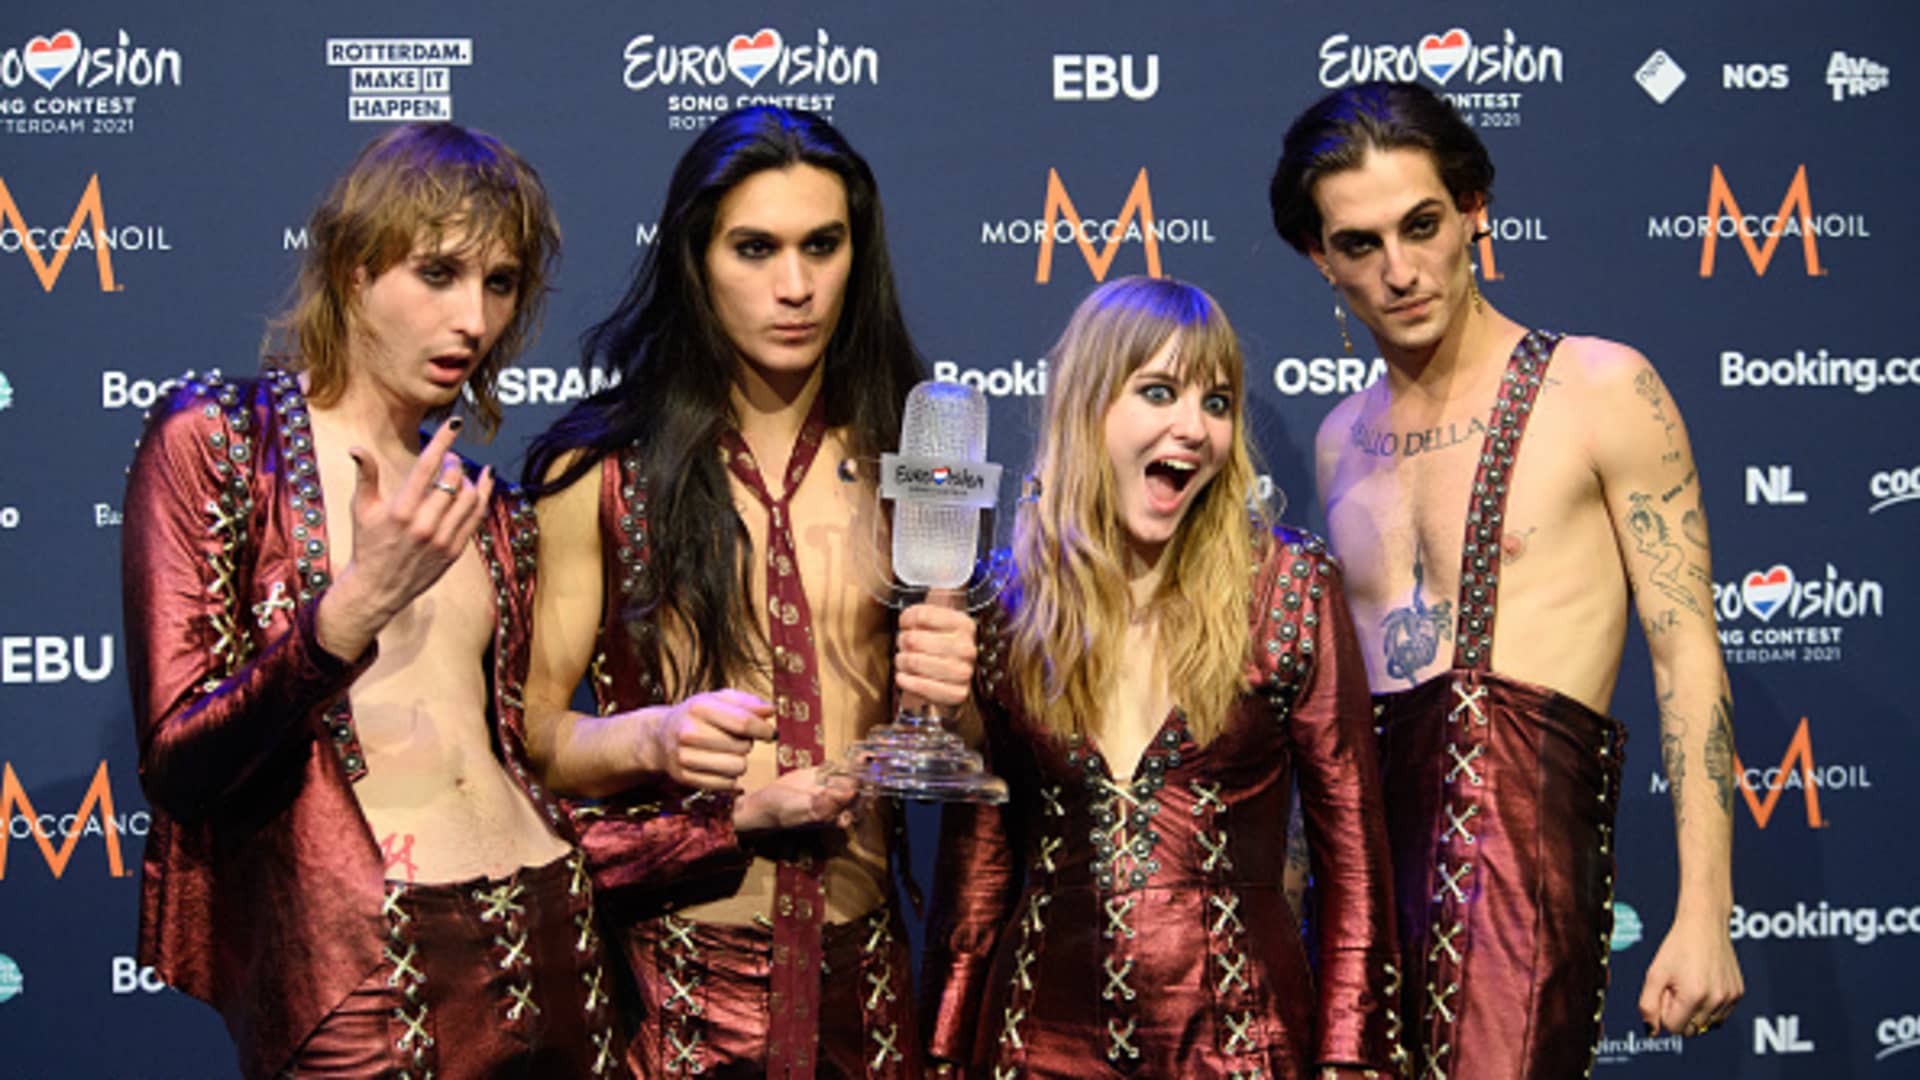 The Italian rock group, Maneskin, won Eurovision 2021, which relied on social distancing and testing to keep attendees healthy before the show.